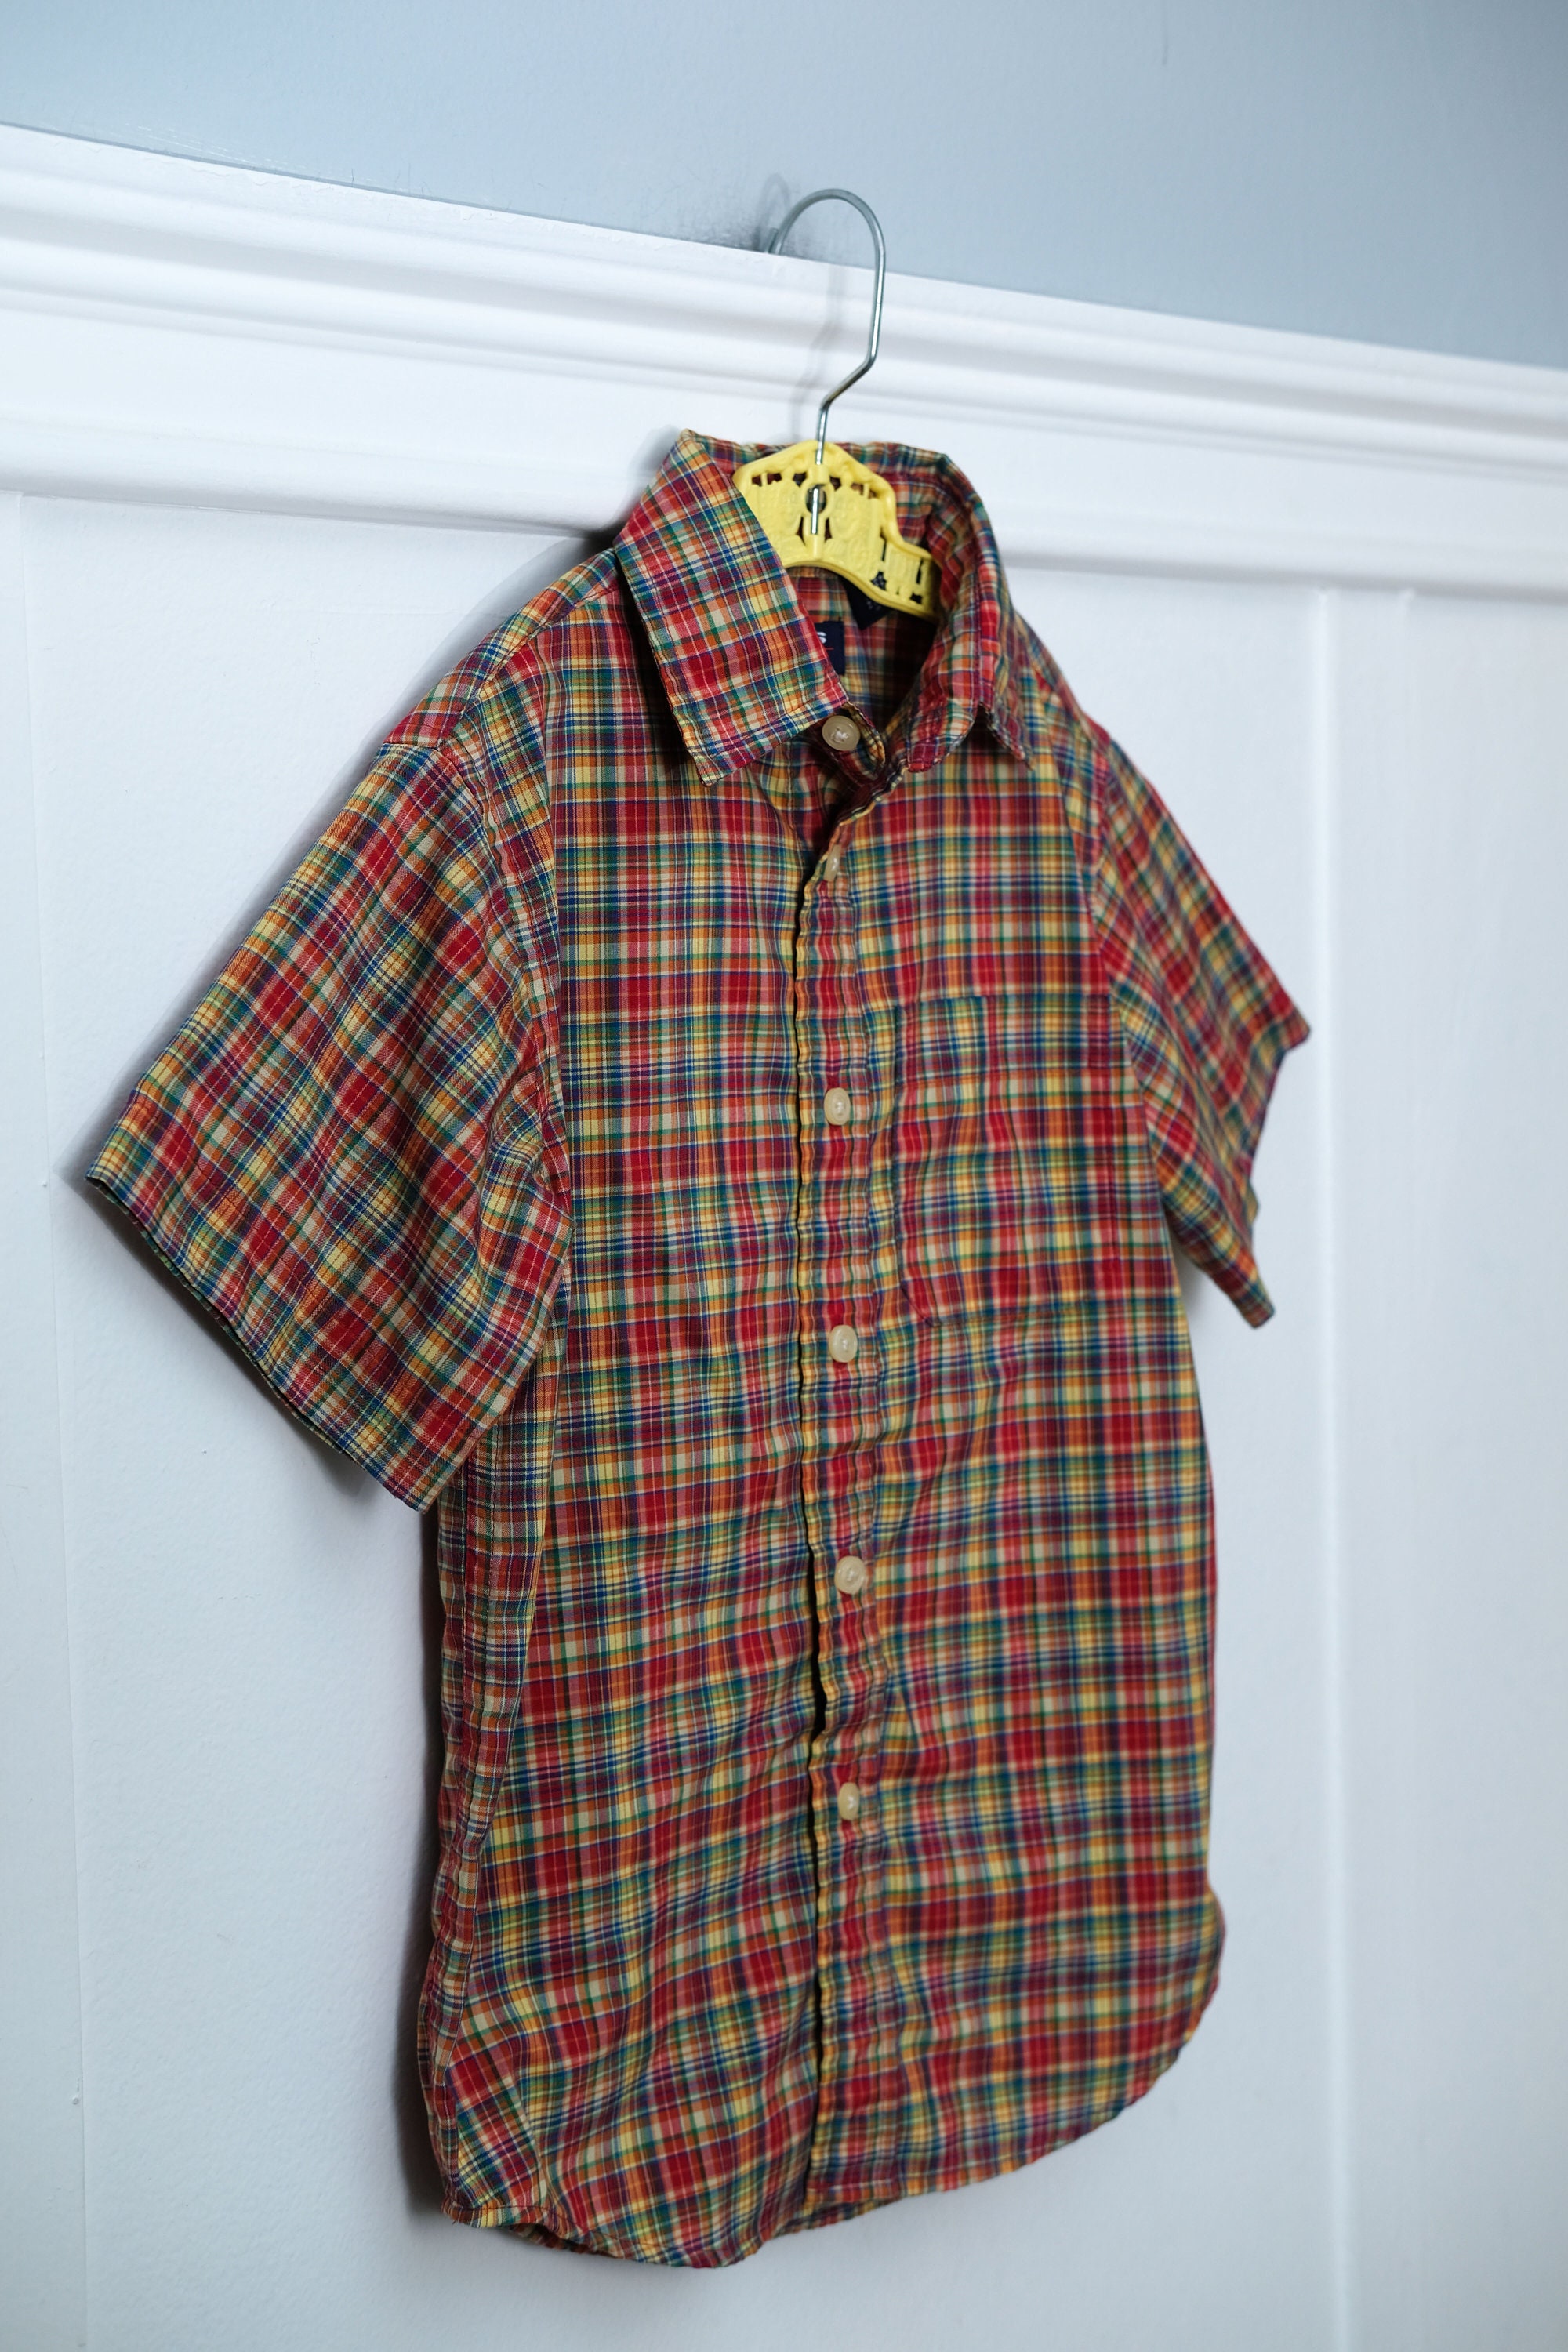 5: Rainbow Plaid Button Down Shirt with Pockets by Class Club | Etsy